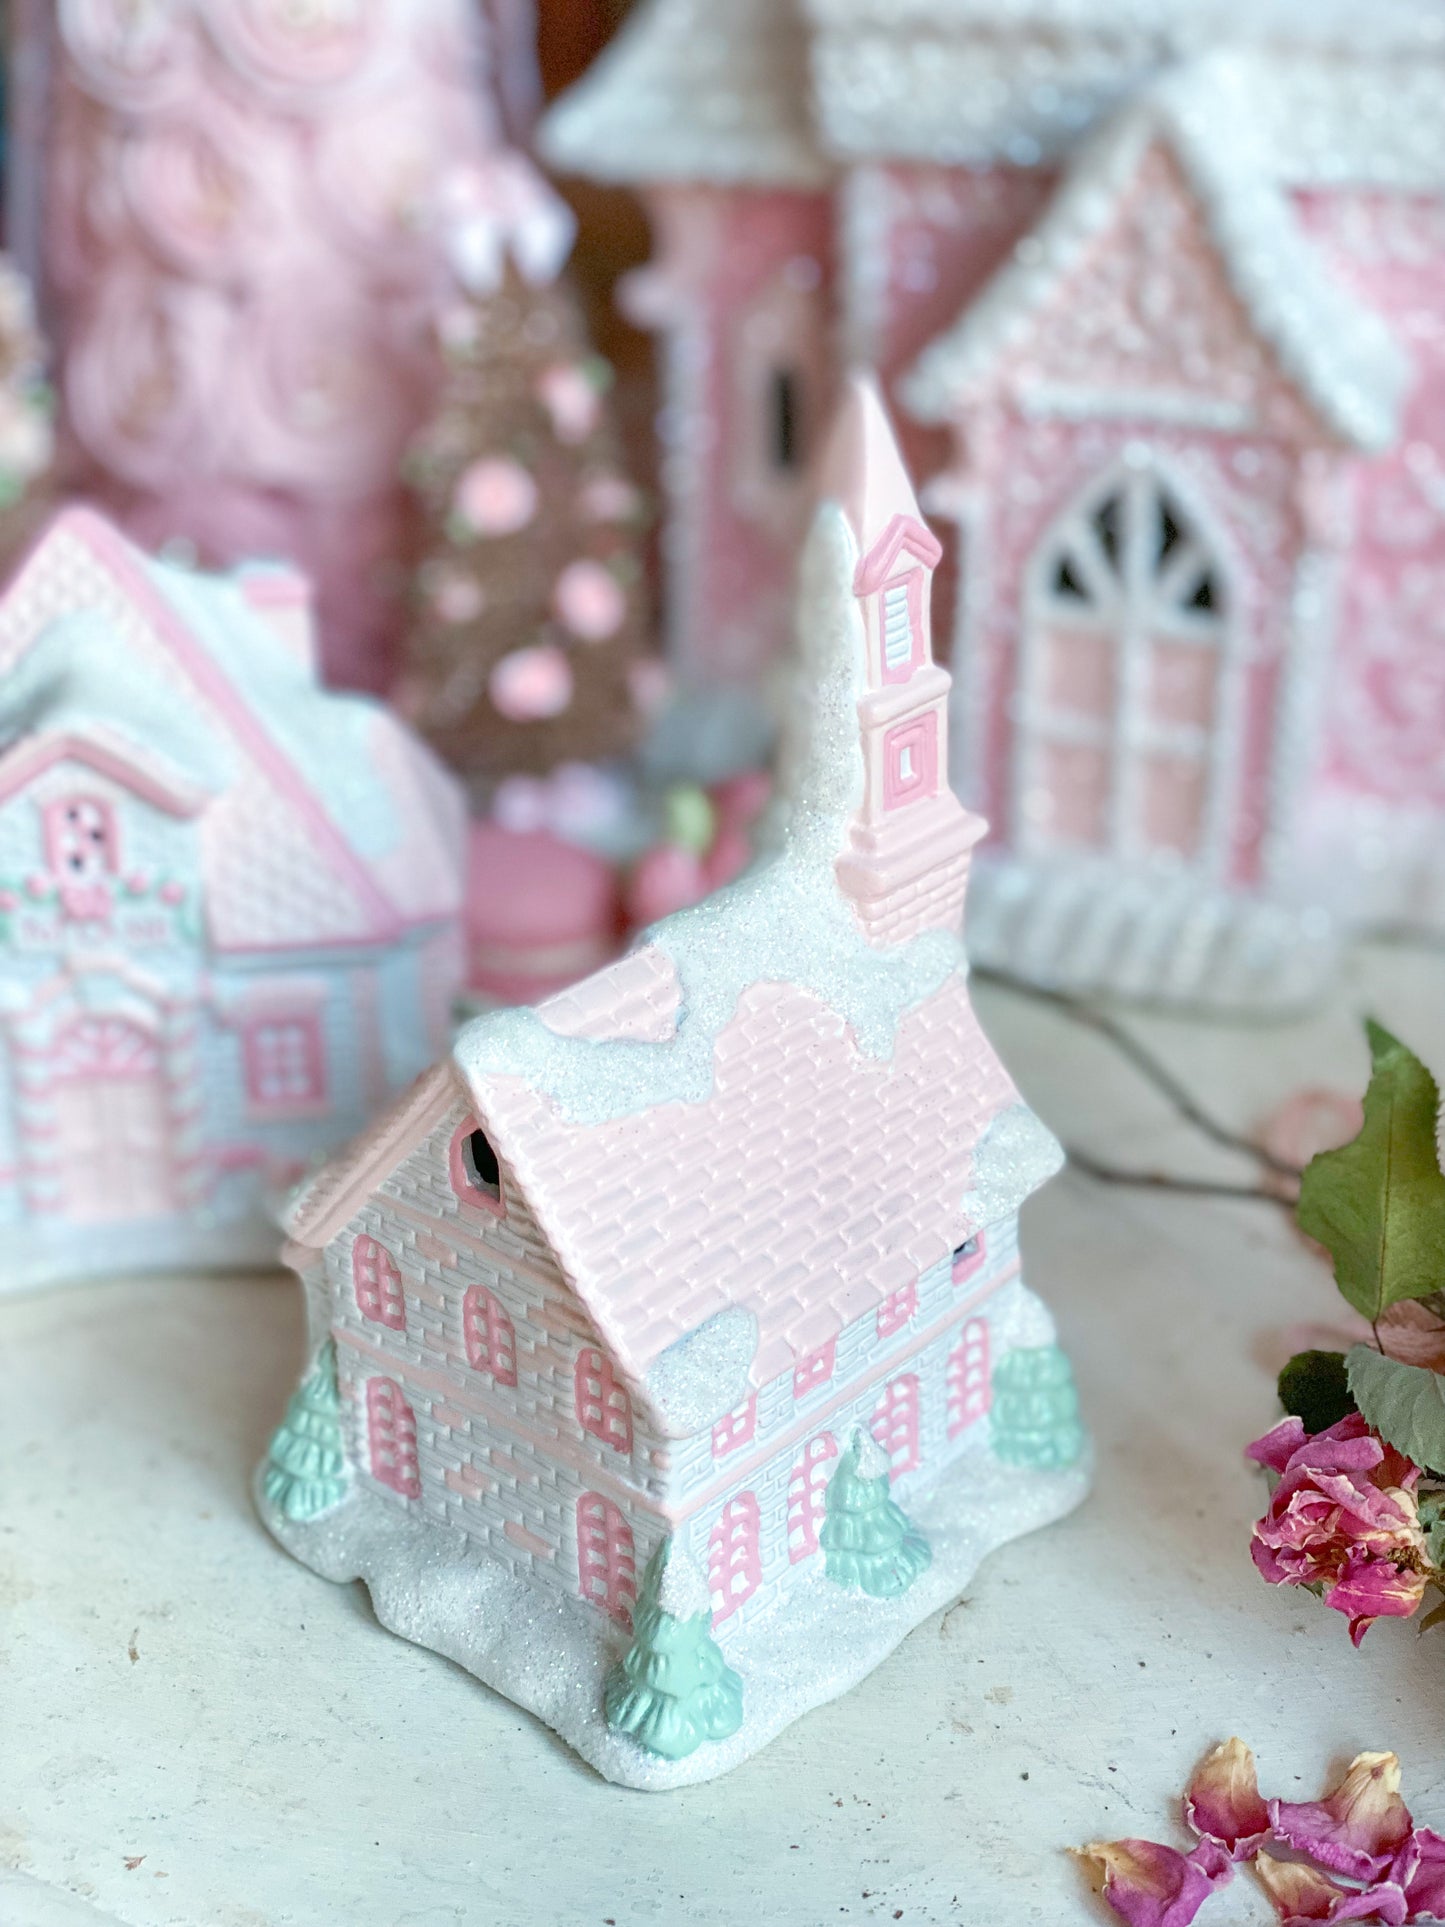 Bespoke Hand Painted Pastel Pink and White Christmas Village Petite St Nicholas Chapel Pre-Order